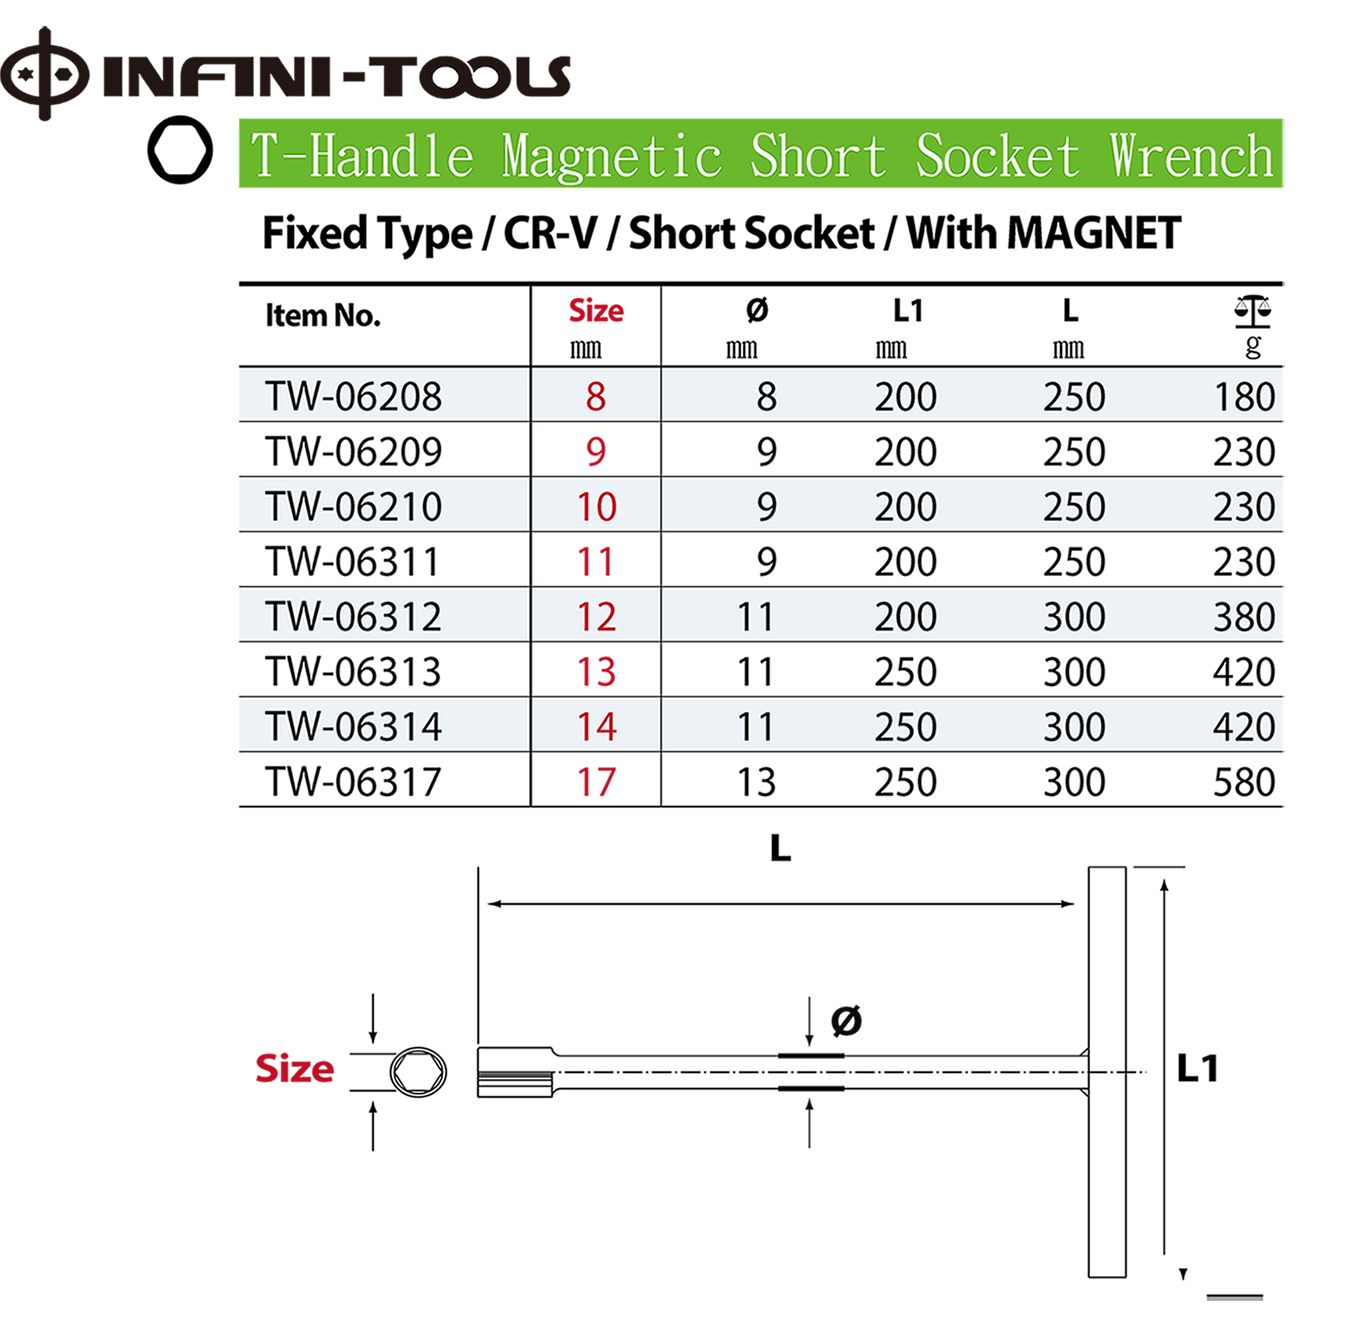 T-Handle Magnetic Short Socket Wrench,TW-06208-3